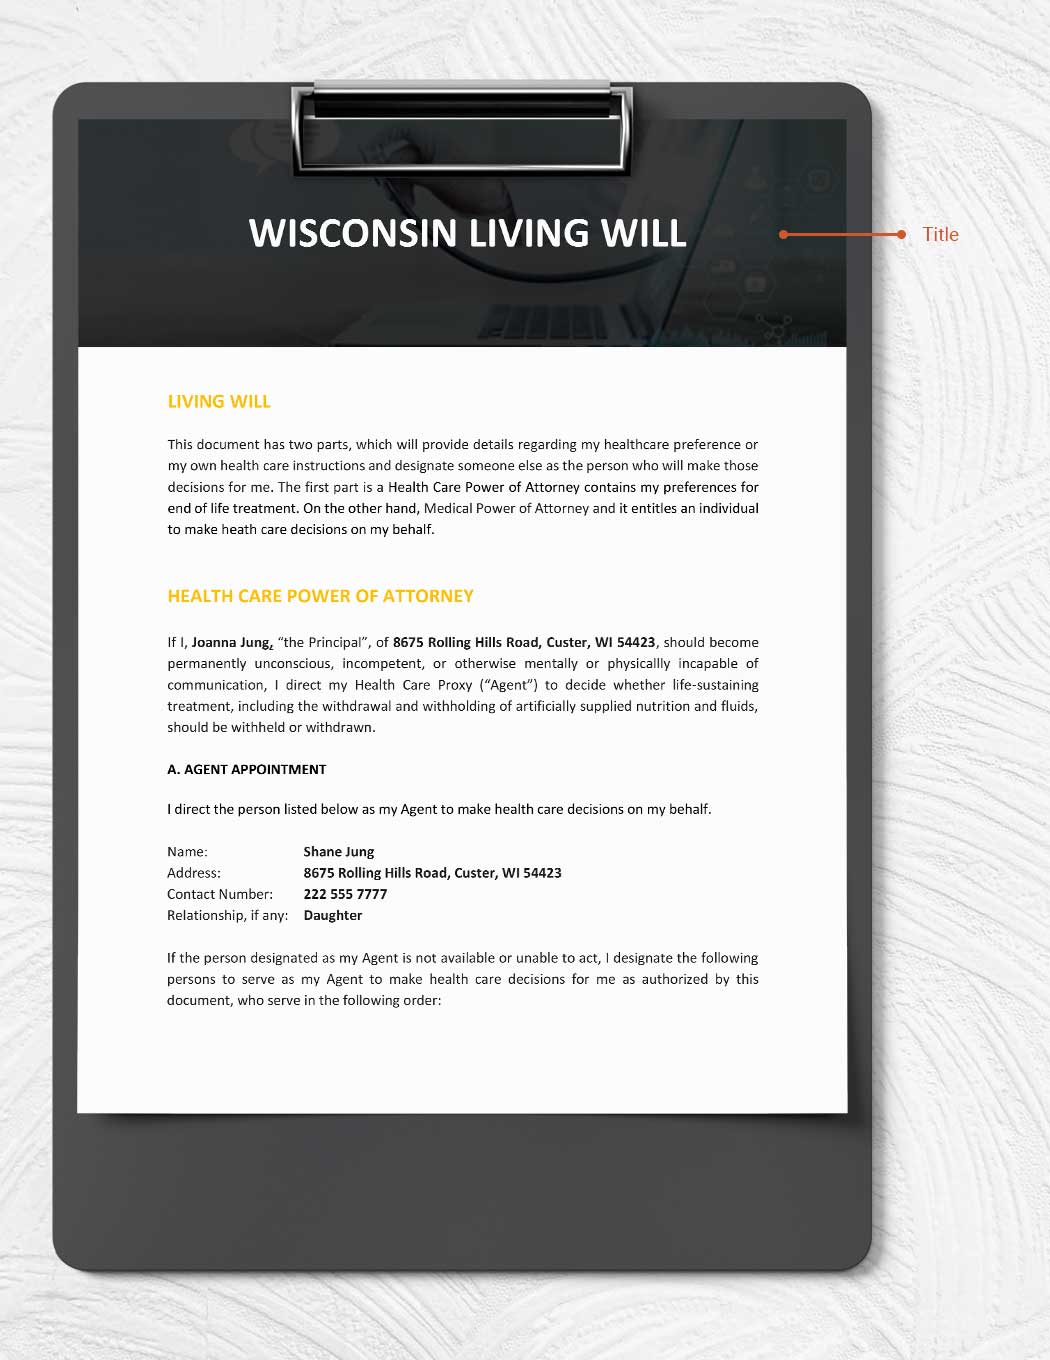 Wisconsin Living Will Template Download in Word, Google Docs